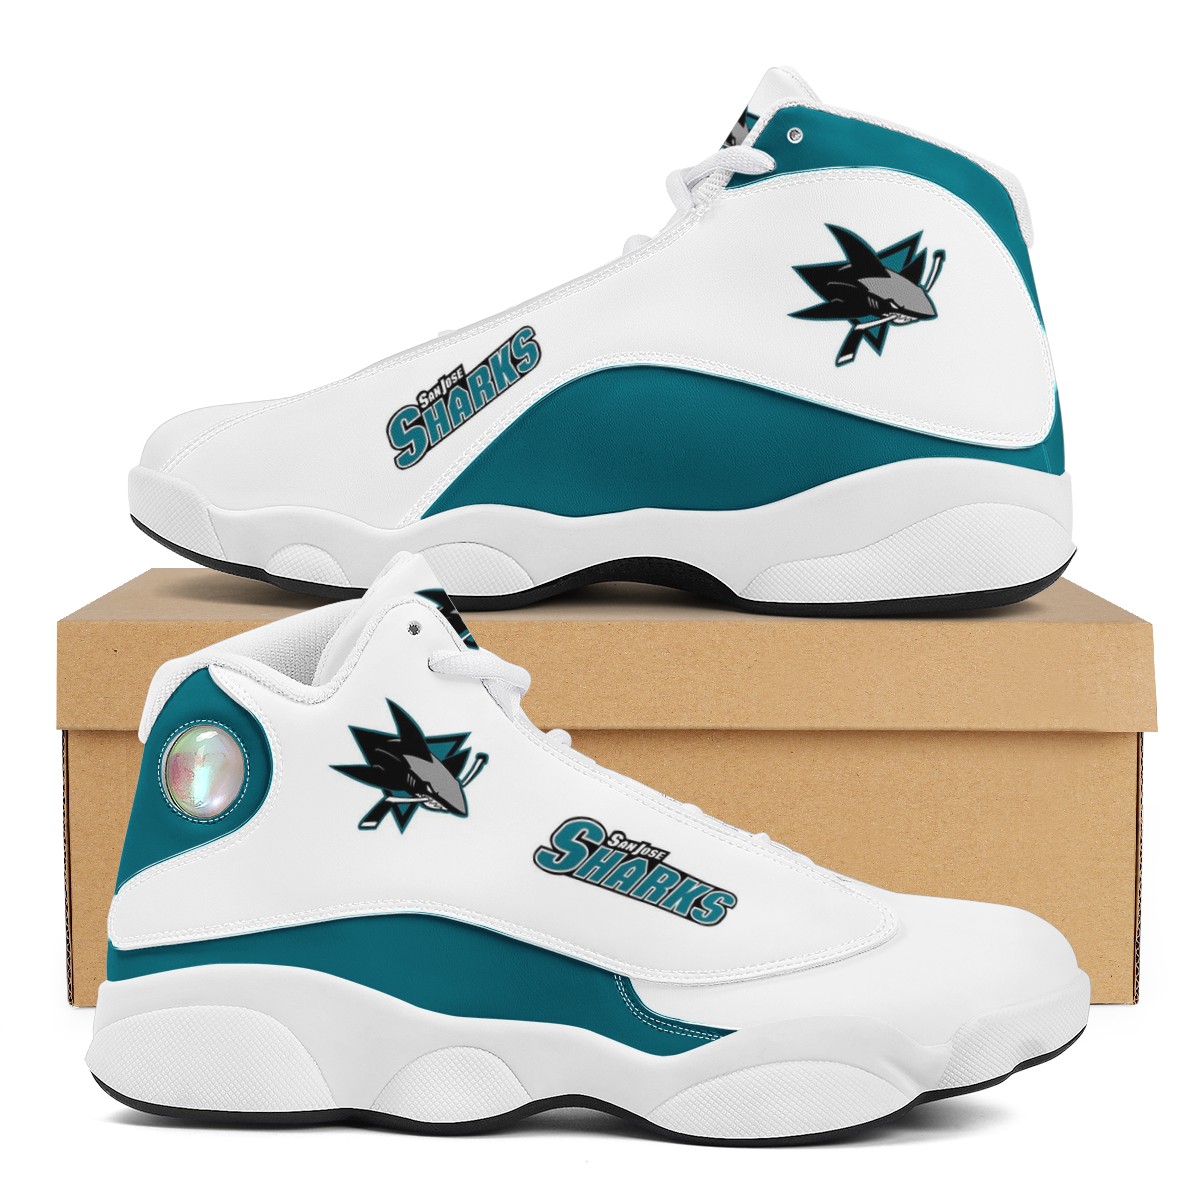 Women's San Jose Sharks Limited Edition JD13 Sneakers 001